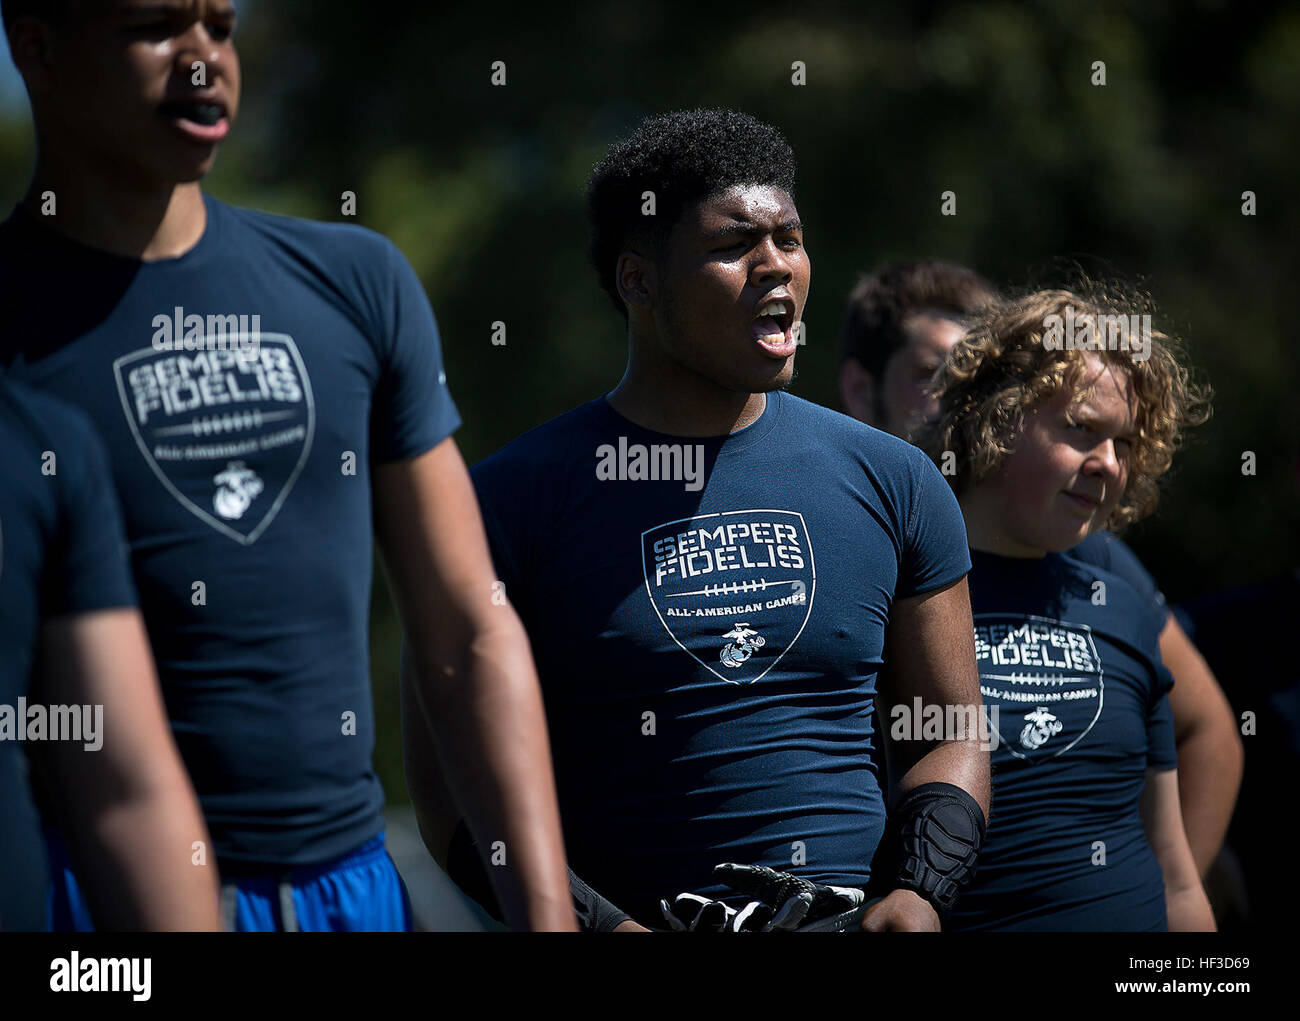 James Hilliard (center), a sophomore at Central Catholic High School, motivates fellow high school football players during a Semper Fidelis All-American football camp at Hazen High School in Renton, Washington, June 14, 2015. More than 160 players from across Washington State experienced the one-day camp, led by former NFL coaches, local high school coaches and Marines. The camp, which focused on leadership and honor both on and off the field, leads up to the Semper Fidelis All-American Bowl game, which will be played in California in January 2016. (U.S. Marine Corps photo by Sgt. Reece Lodder Stock Photo